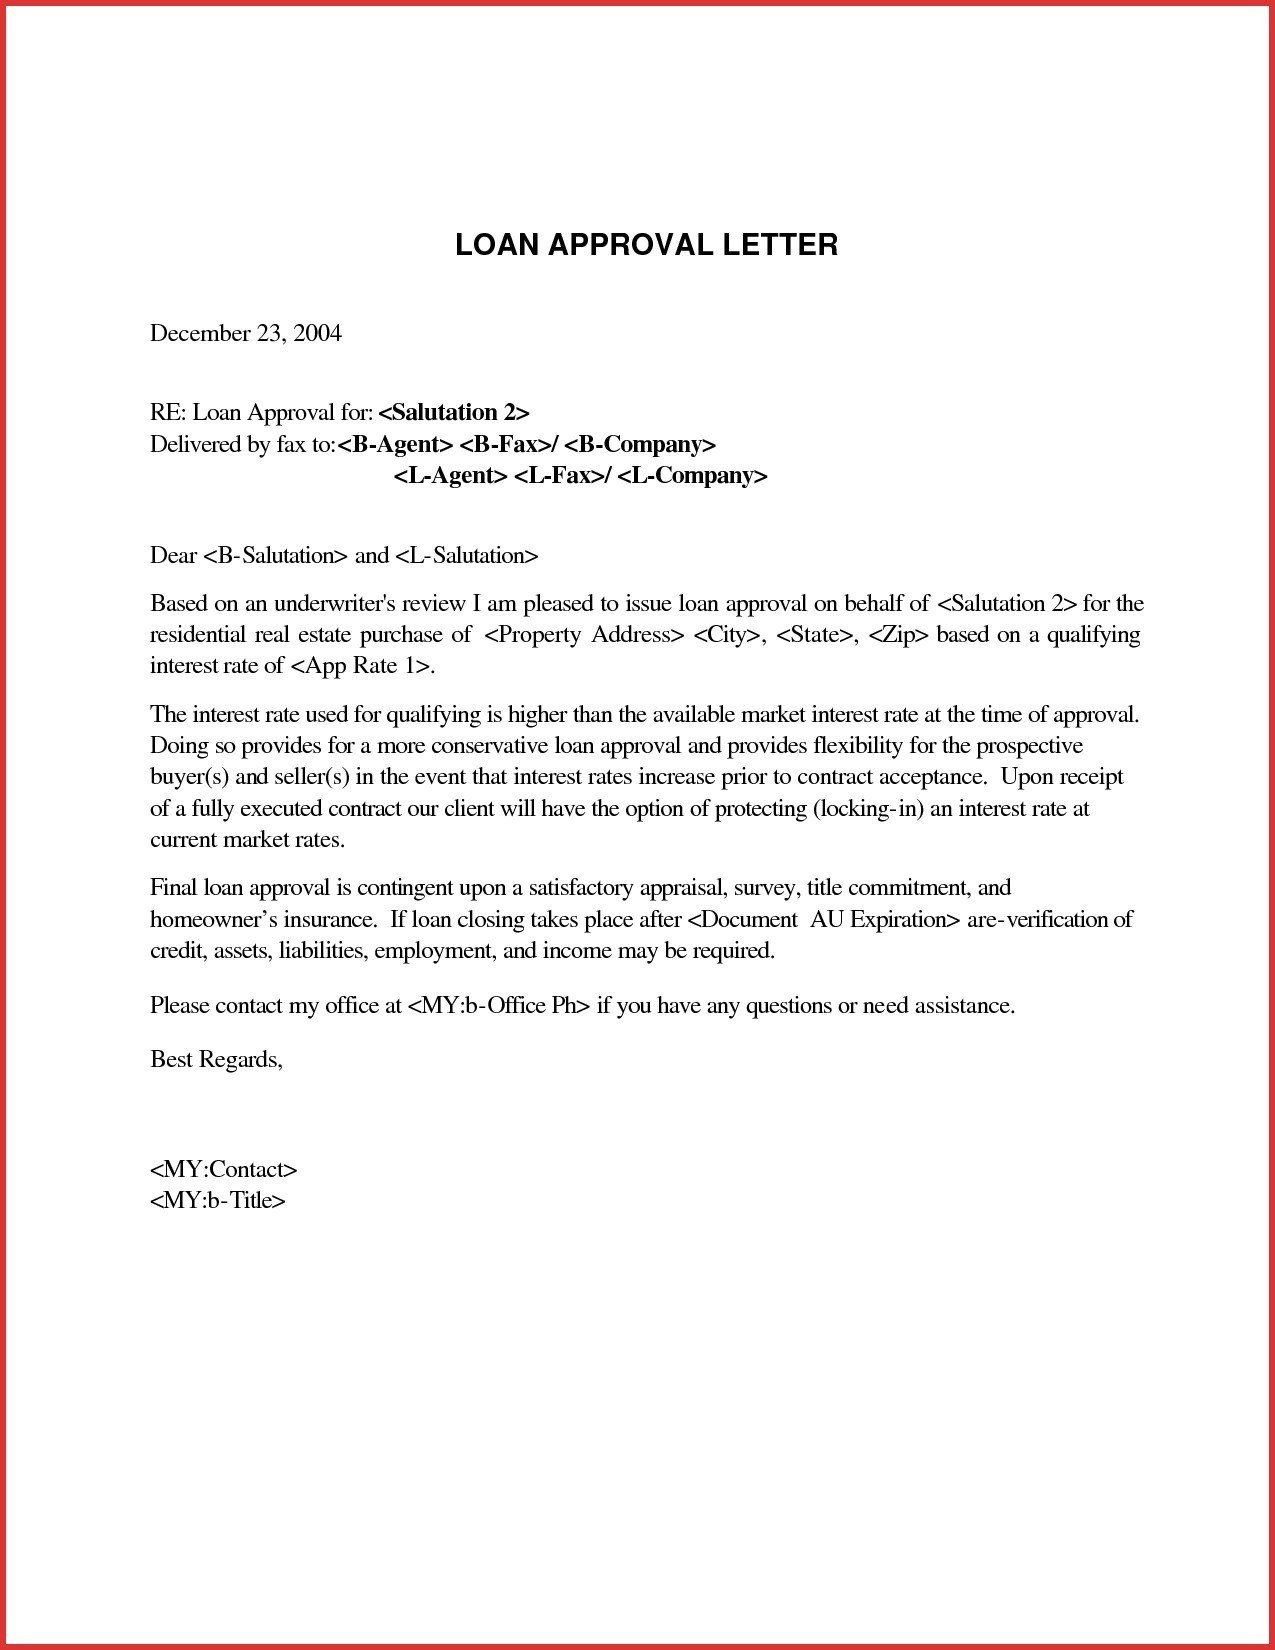 how to write a formal letter to a bank requesting a loan